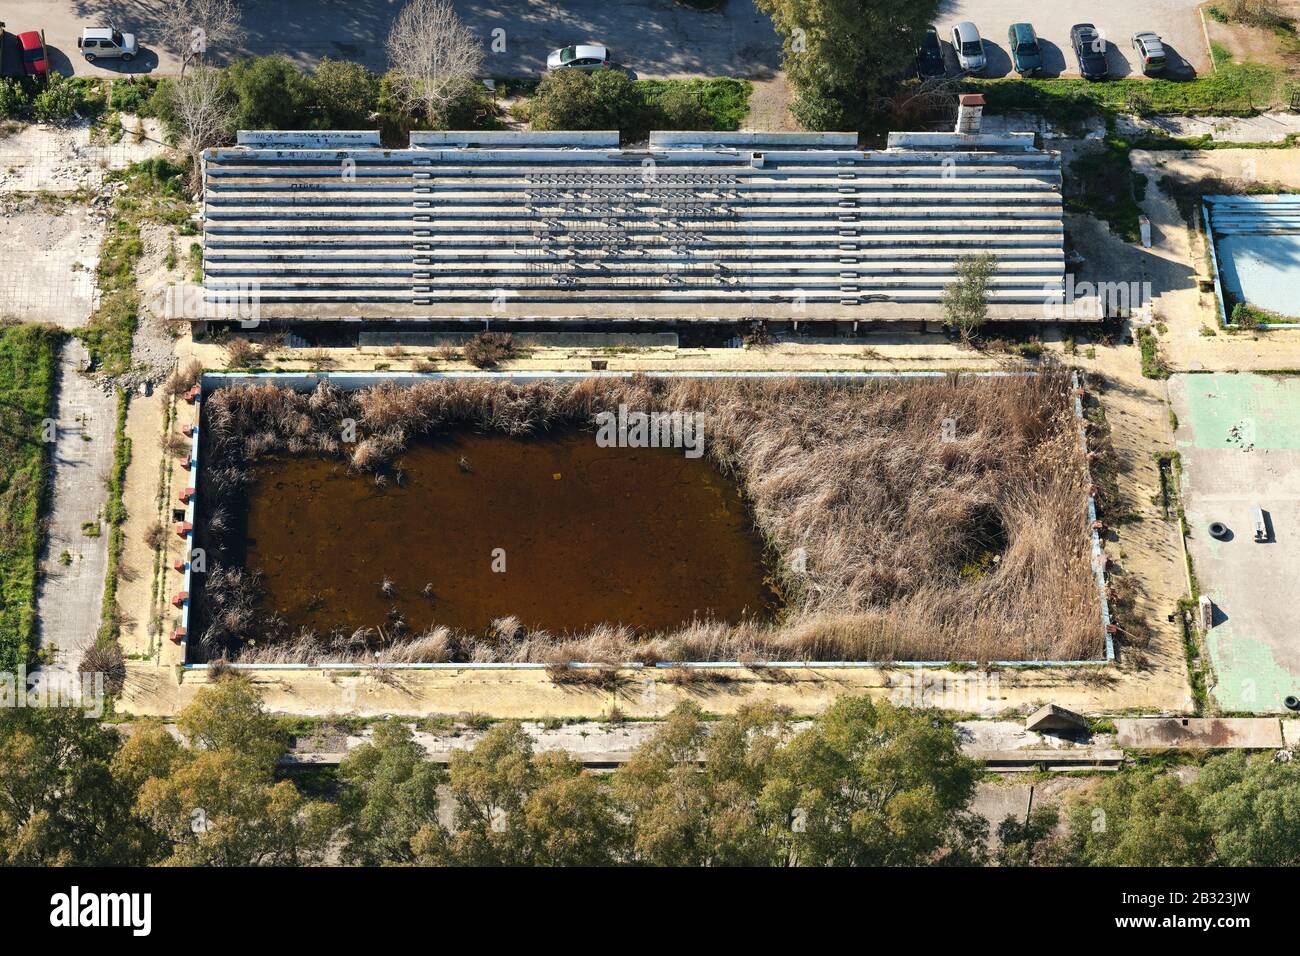 AERIAL VIEW. Abandoned olympic-size swimming pool reclaimed by vegetation. Patras, West Greece, Peloponnese Peninsula, Greece. Stock Photo